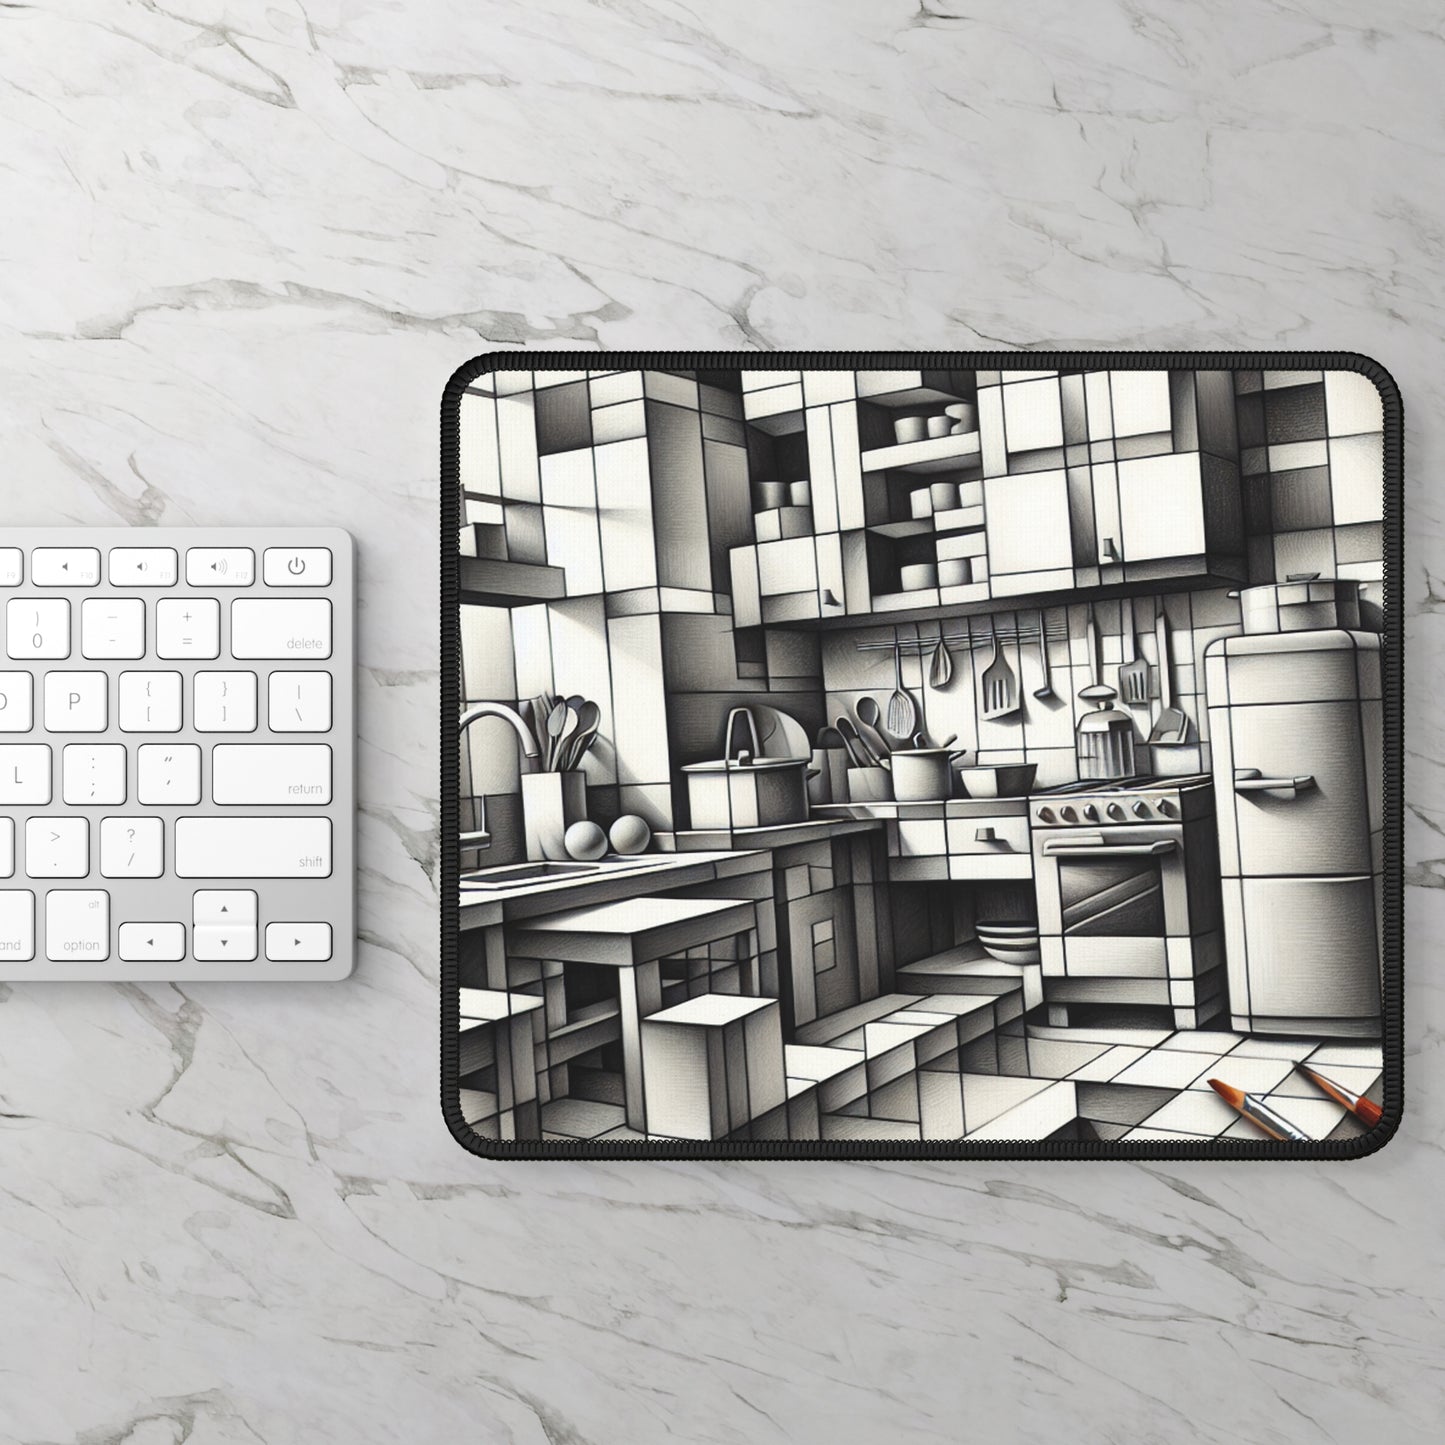 "Cubist Kitchen Collage" - The Alien Gaming Mouse Pad Cubism Style